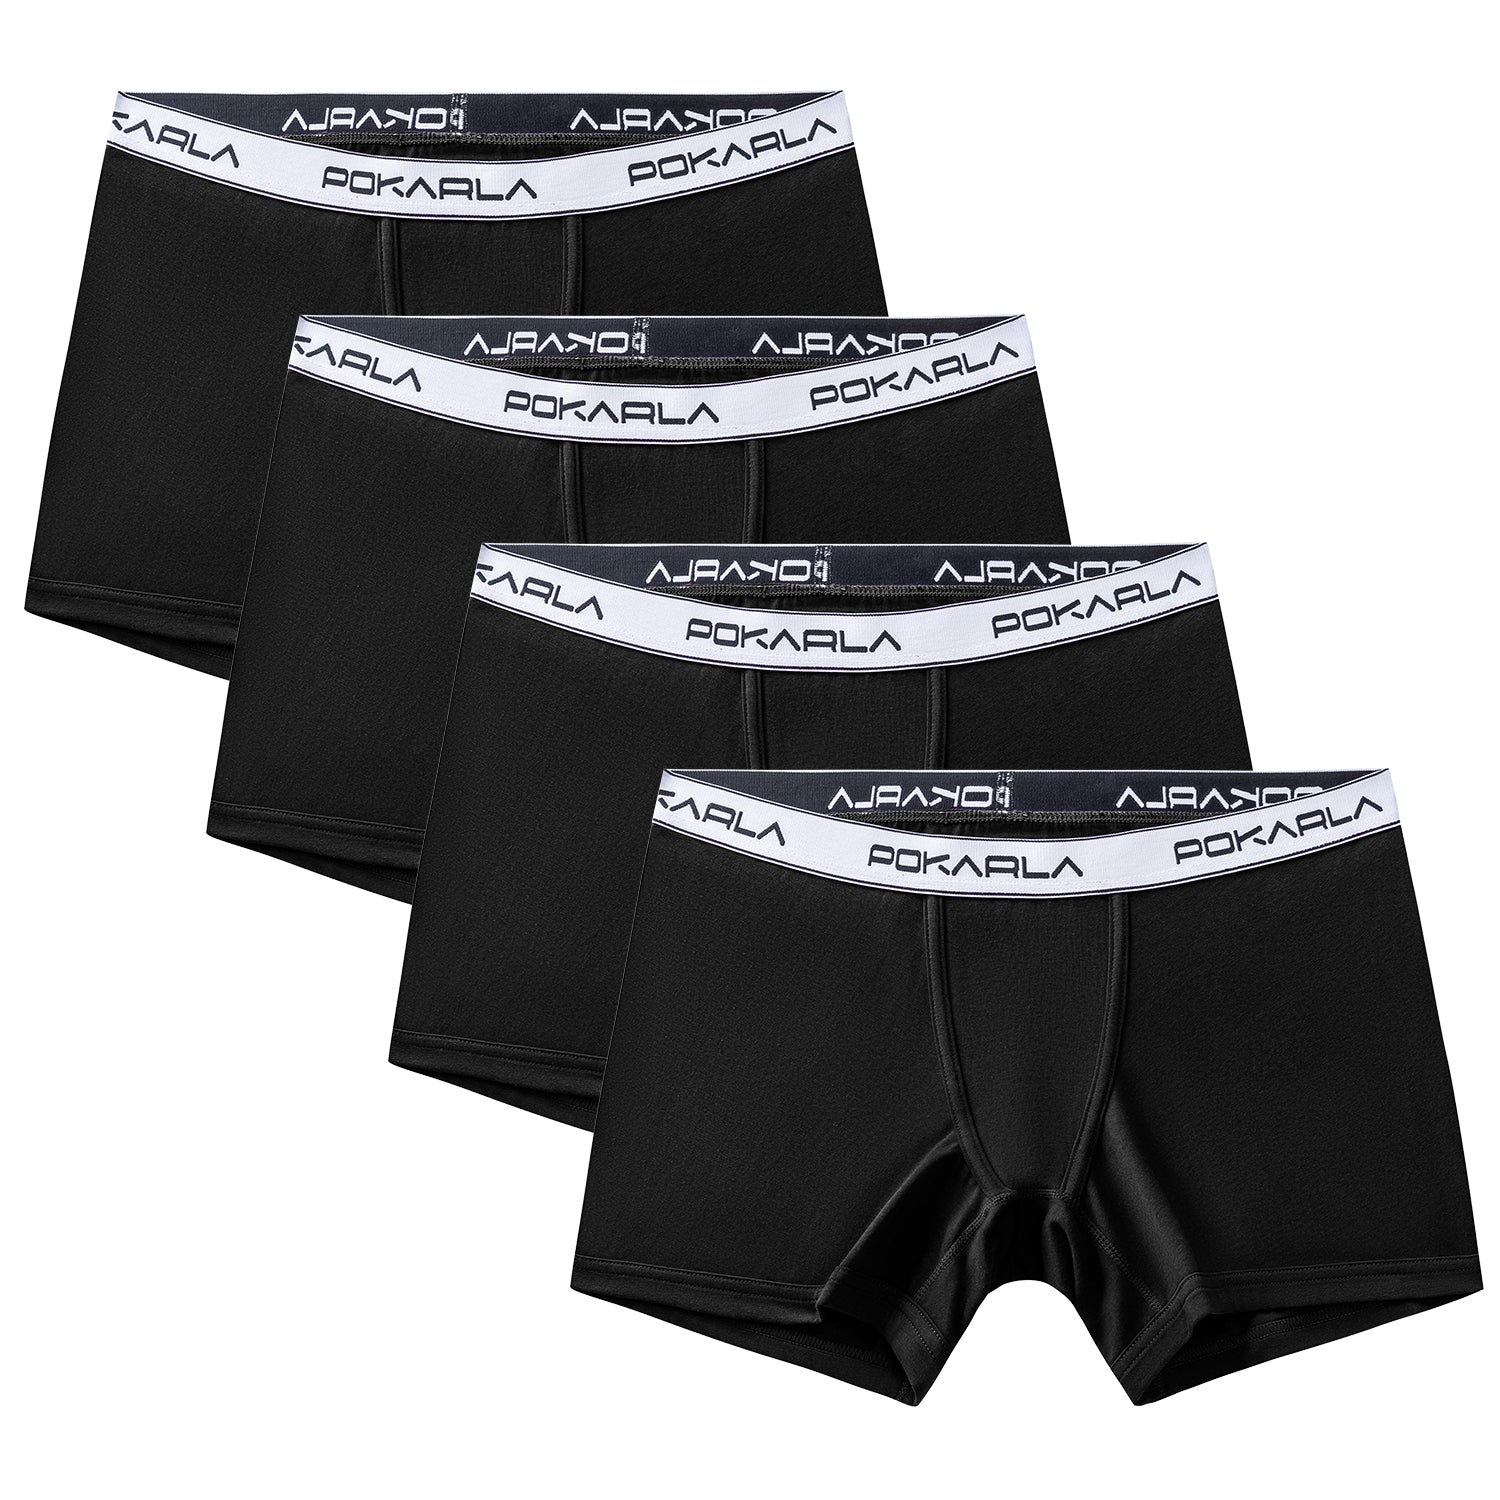 4.5 Inseam Womens Trunks Underwear Soft Cotton Boxer Briefs Ladies Anti  Chafing Plus Size Boy Shorts Panties Pack Of 4